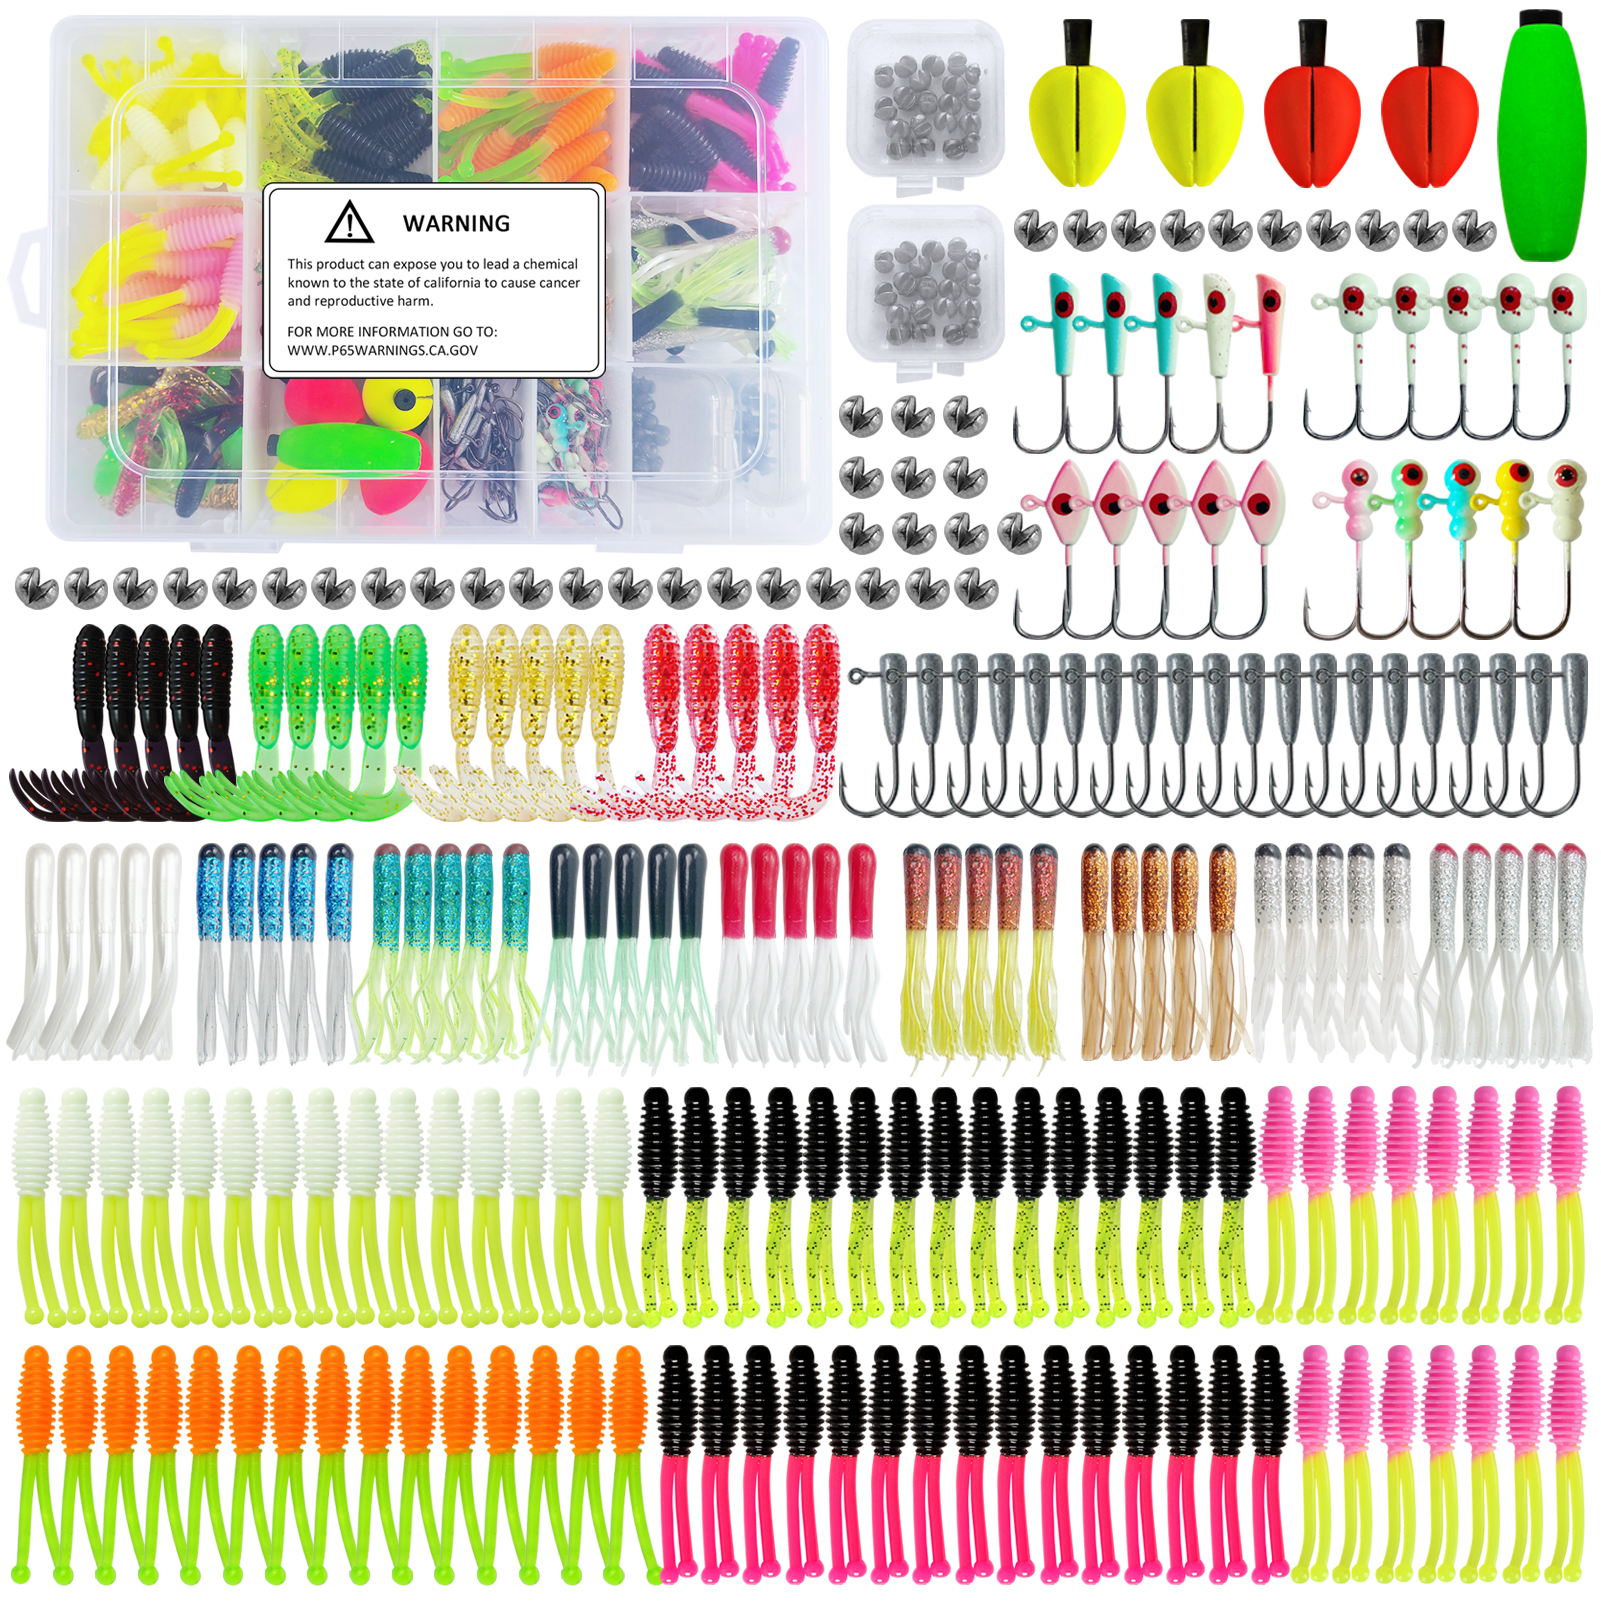 FREE FISHER 228pcs/Lot Soft Lures Kit Fishing Tackle Box Double-tail Worm Lures Jig Head Hooks Floats Buoy Sinkers Octopus Soft Grub Baits